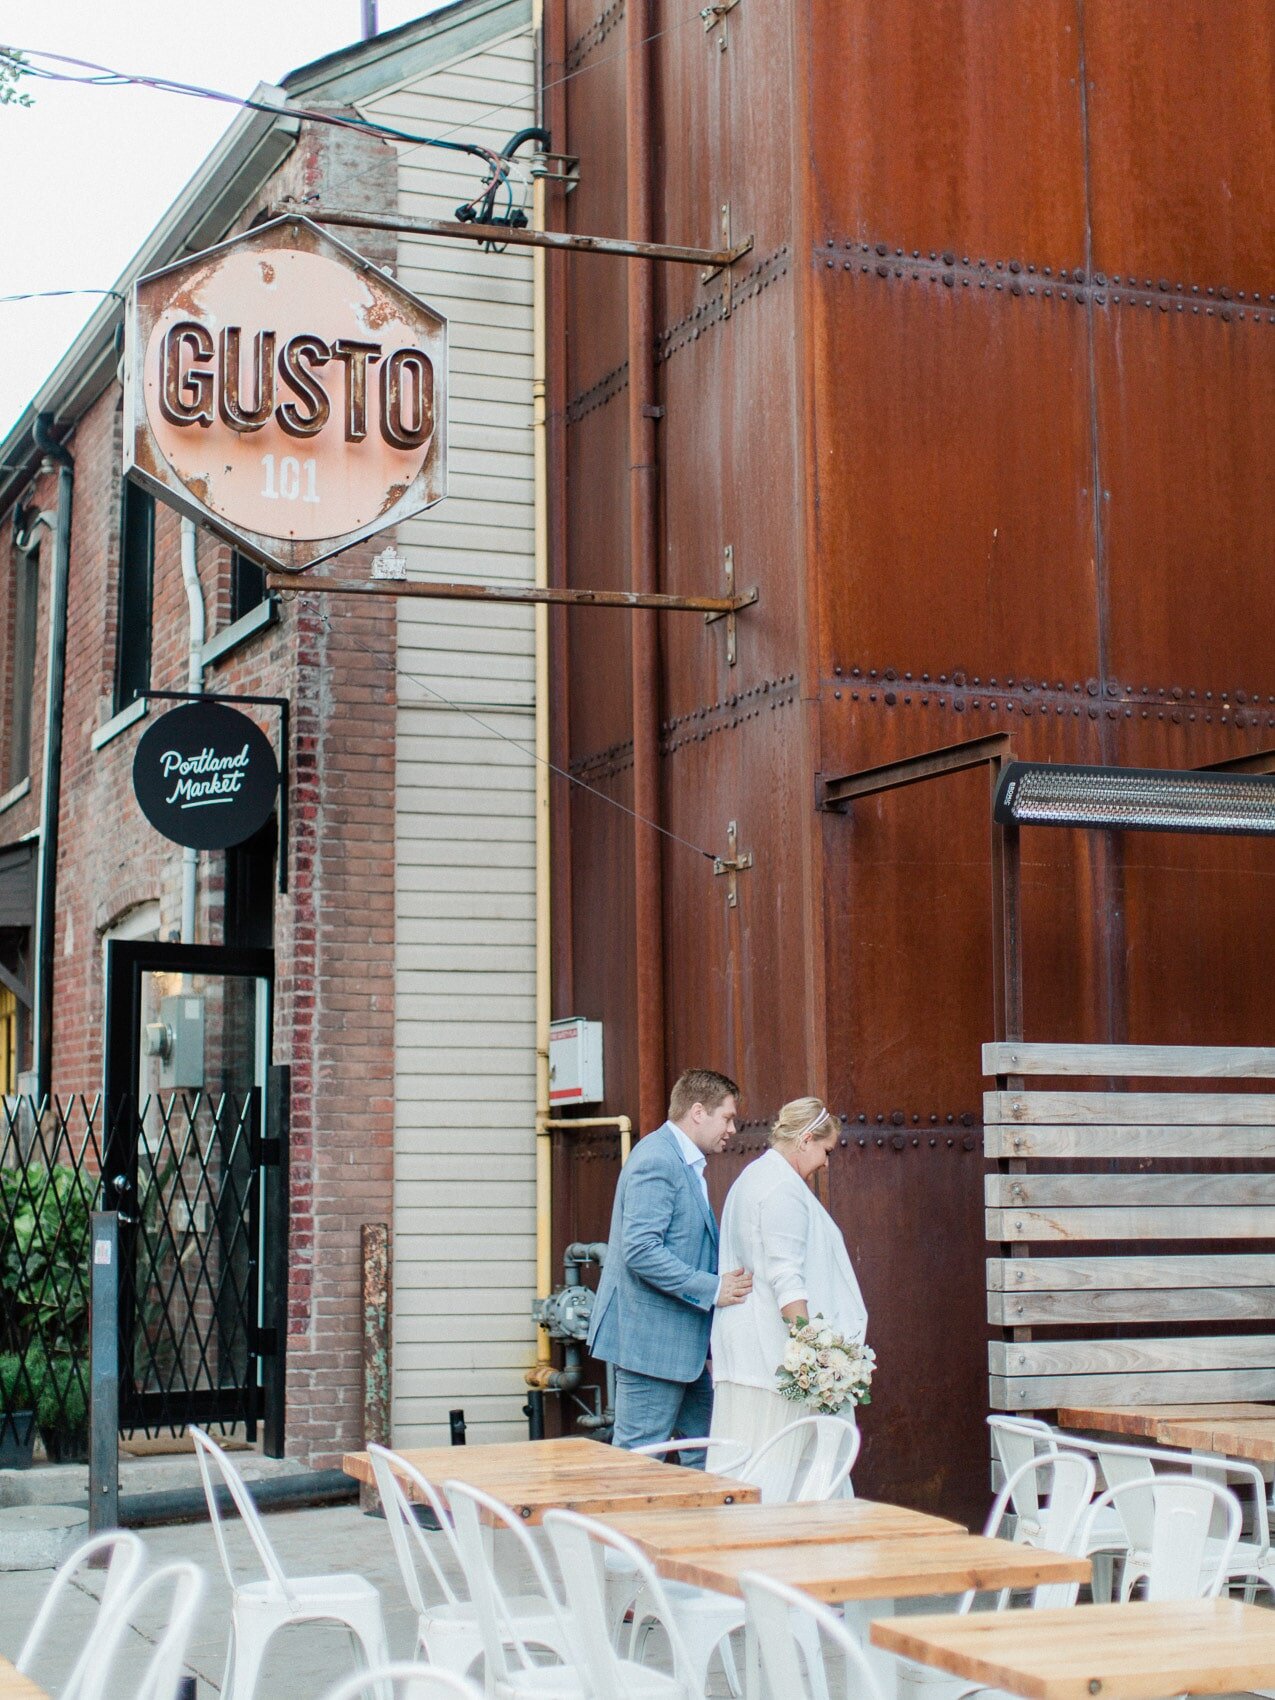 candid couple posing naturally for their wedding photos at their elopement at gusto 101